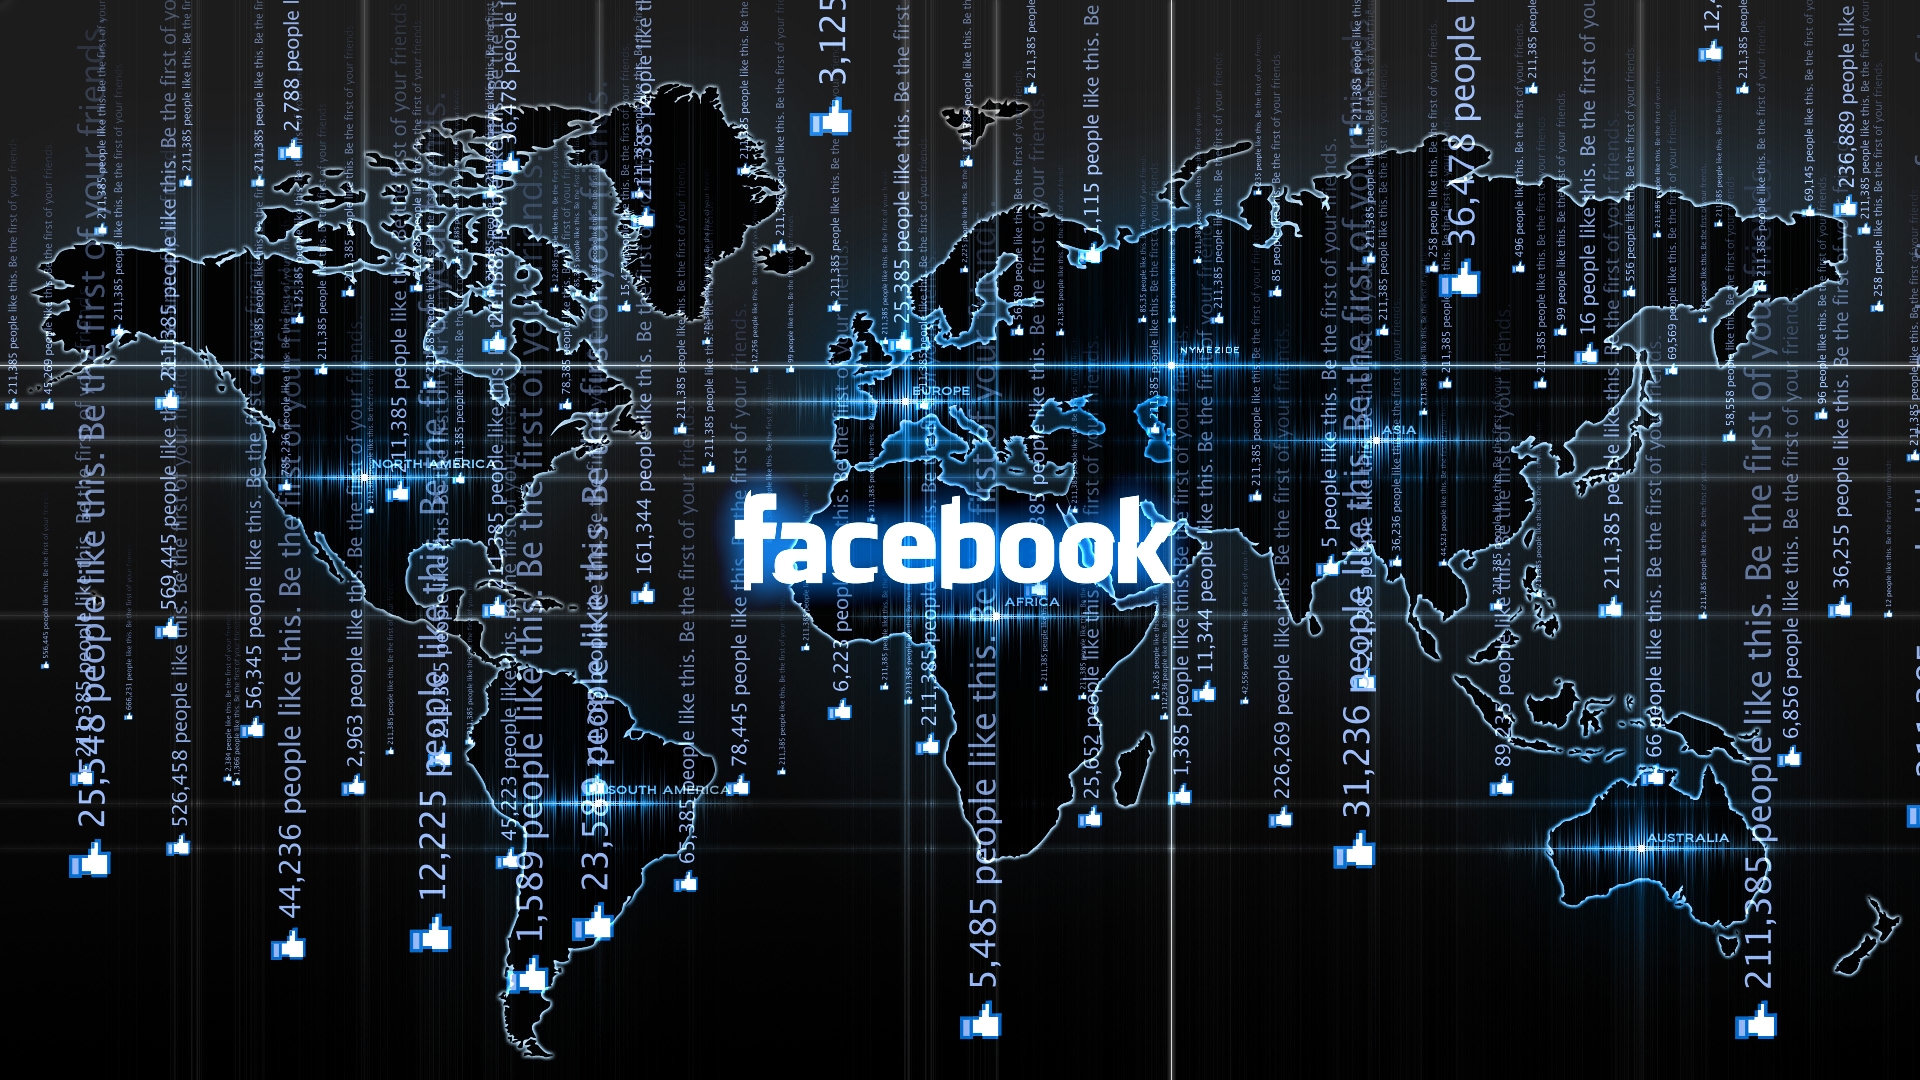 FACEBOOK COIN IS LAUNCHING SOON